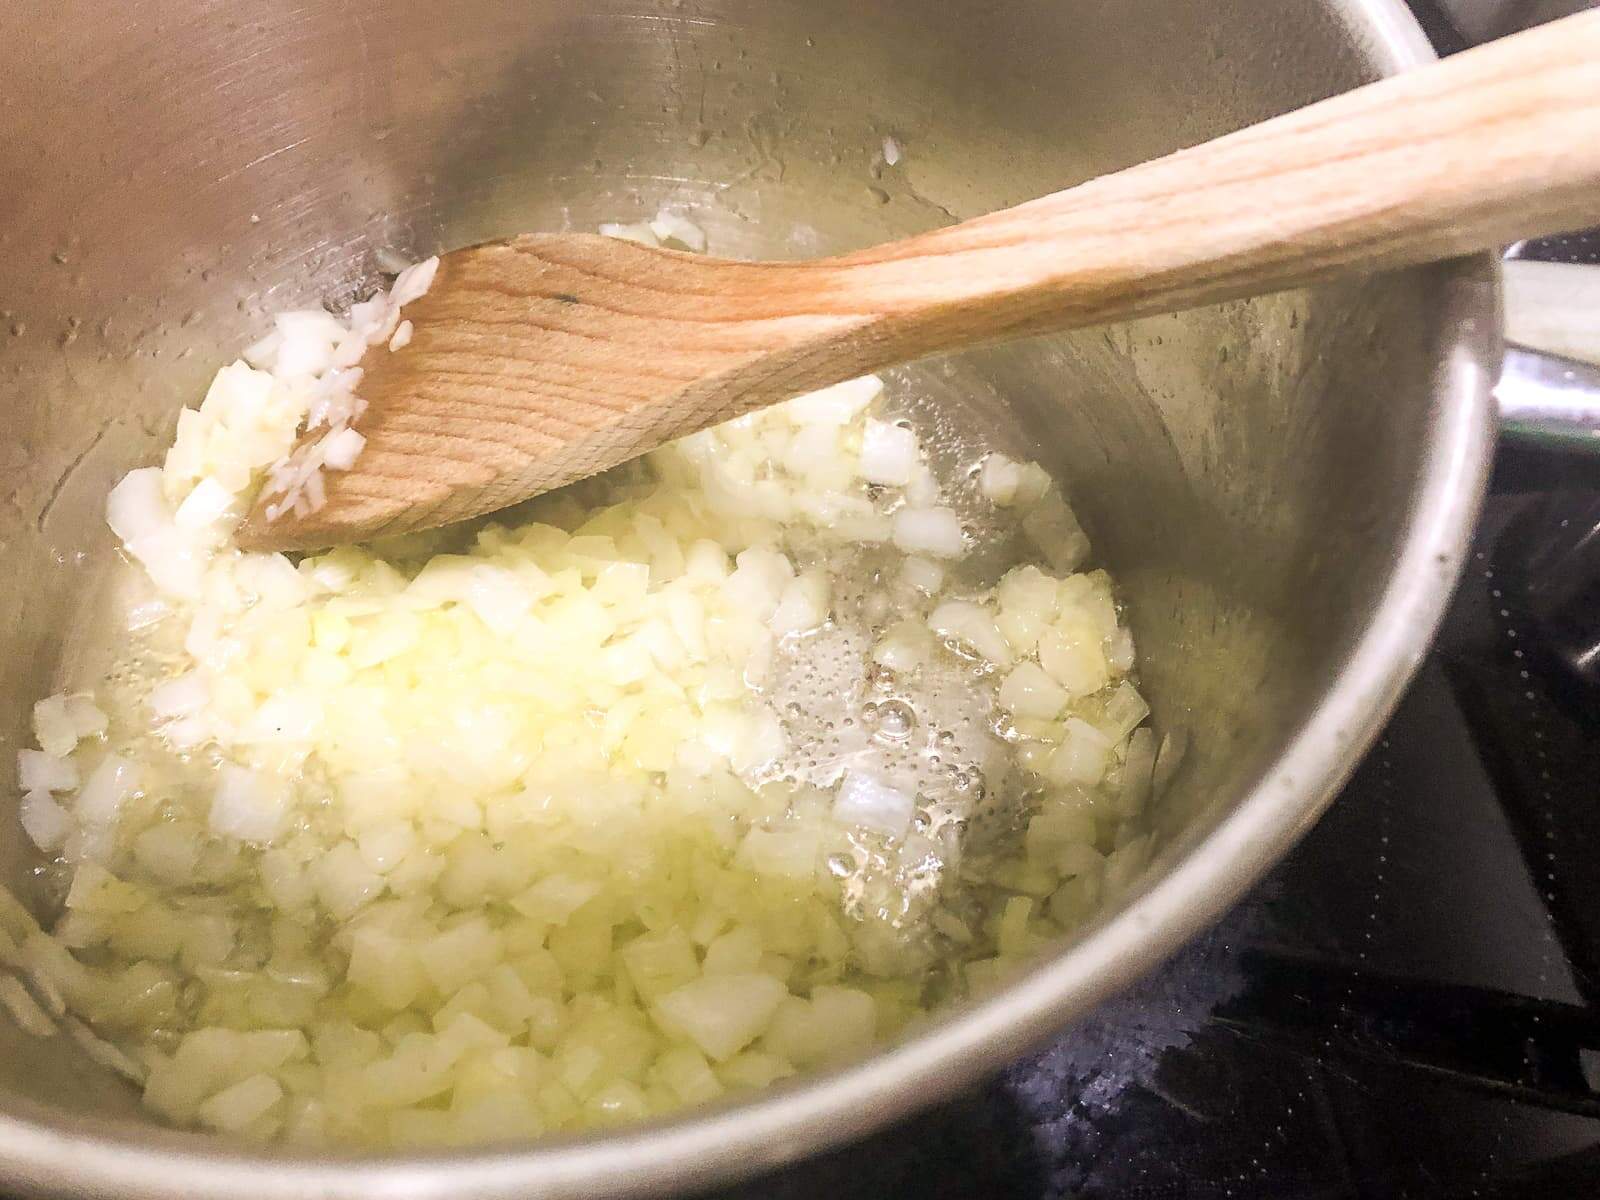 Diced onions and garlic sweating off in a bit of oil in a hot fry pan.